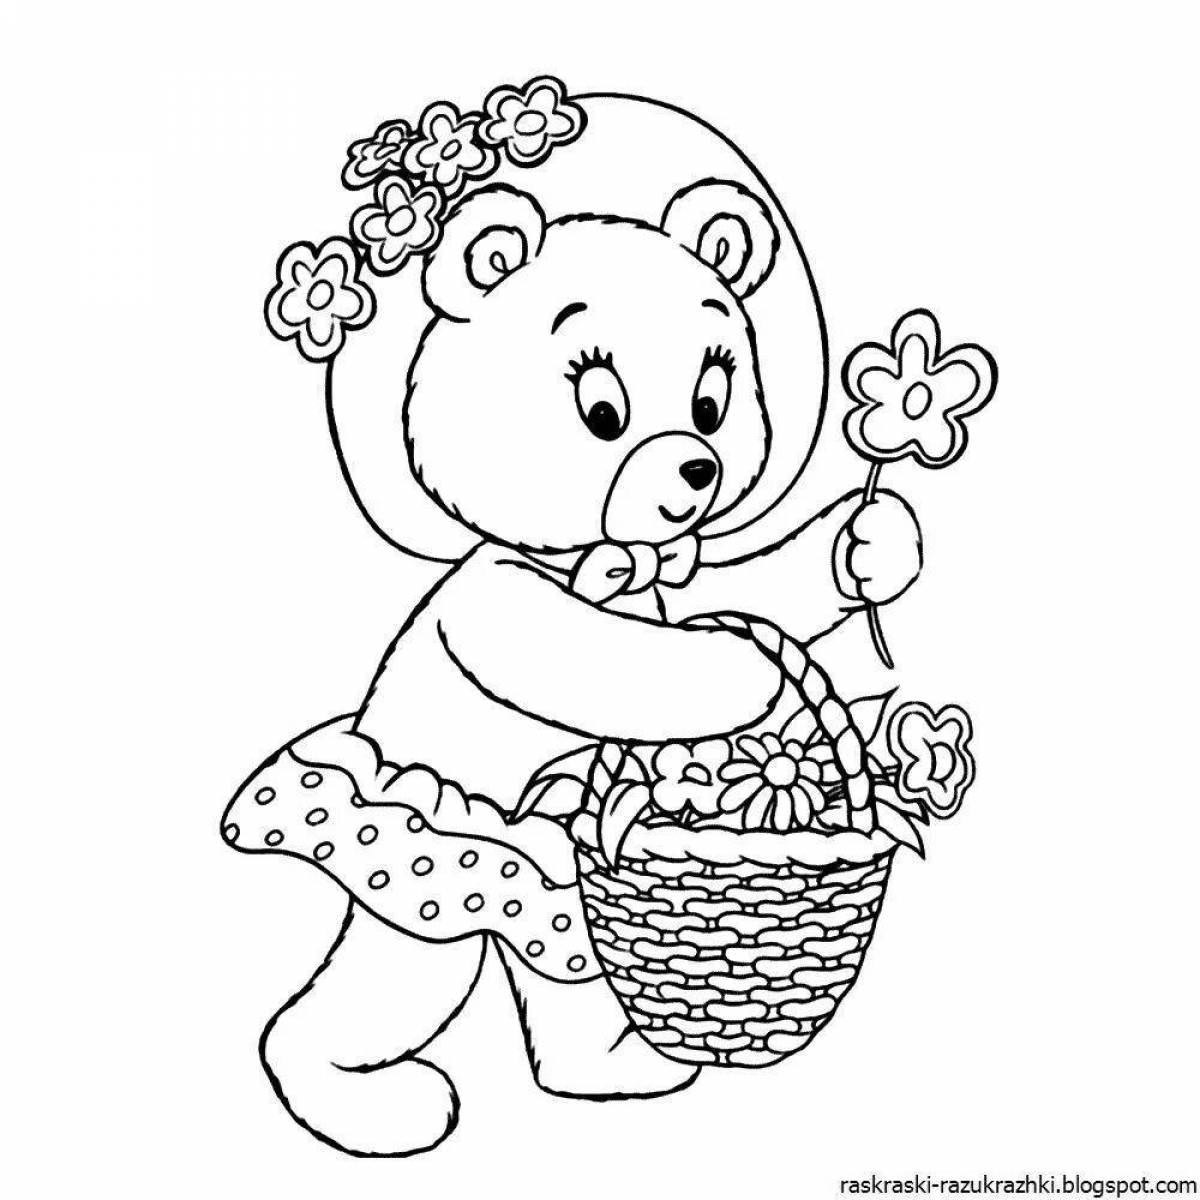 Live teddy bear coloring for girls